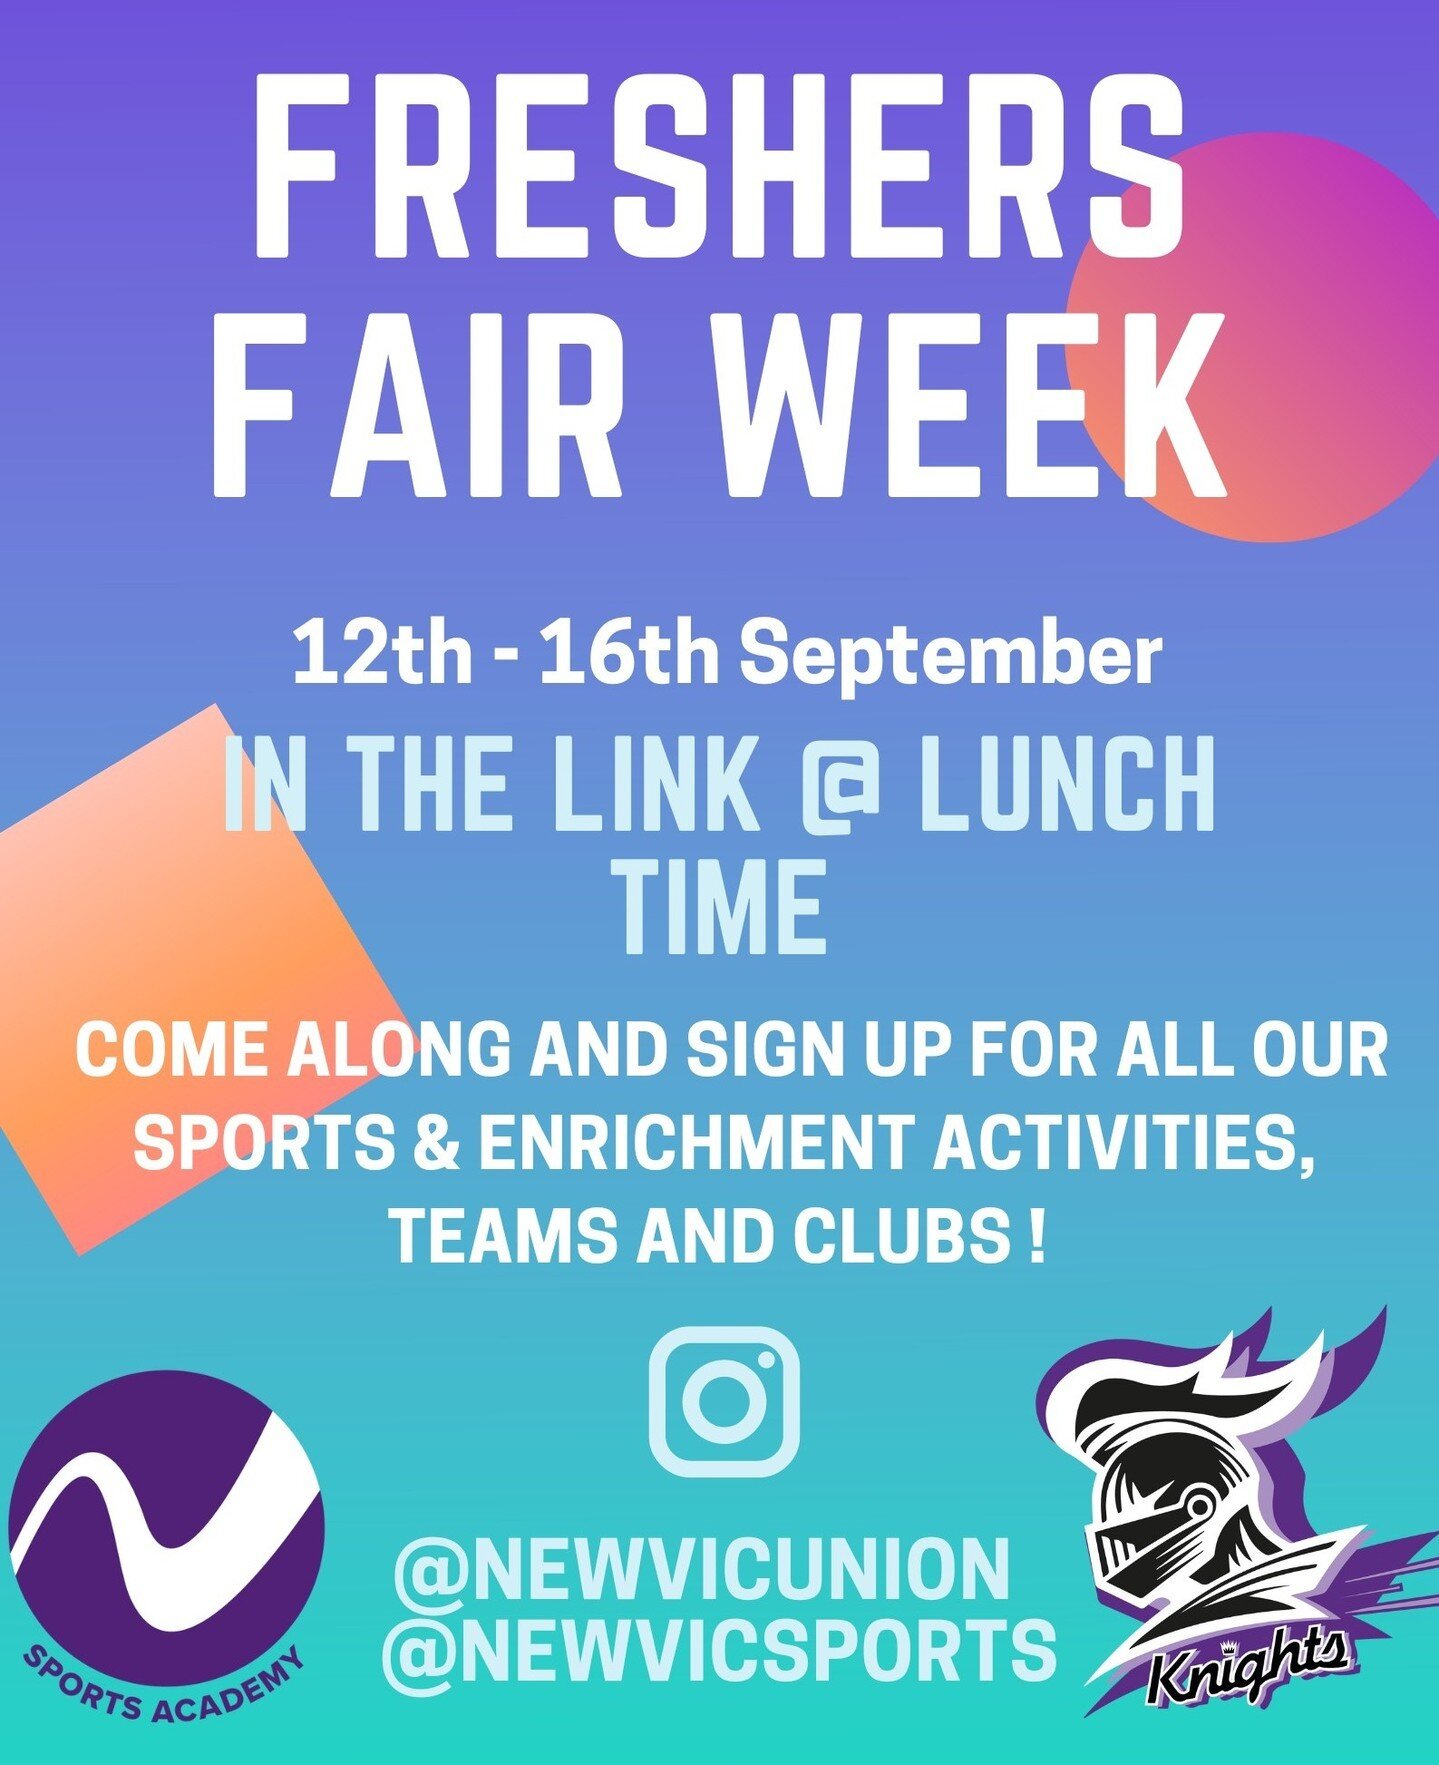 Looking forward to NewVIc Sports Academy and Student Development Freshers Fair next week!

Monday 12 - Friday 16 September 2022 in the link between 12 - 2pm each day.

Come along, sign up and join in. Don't miss out!

#newvicsportscademy #onecollegeo